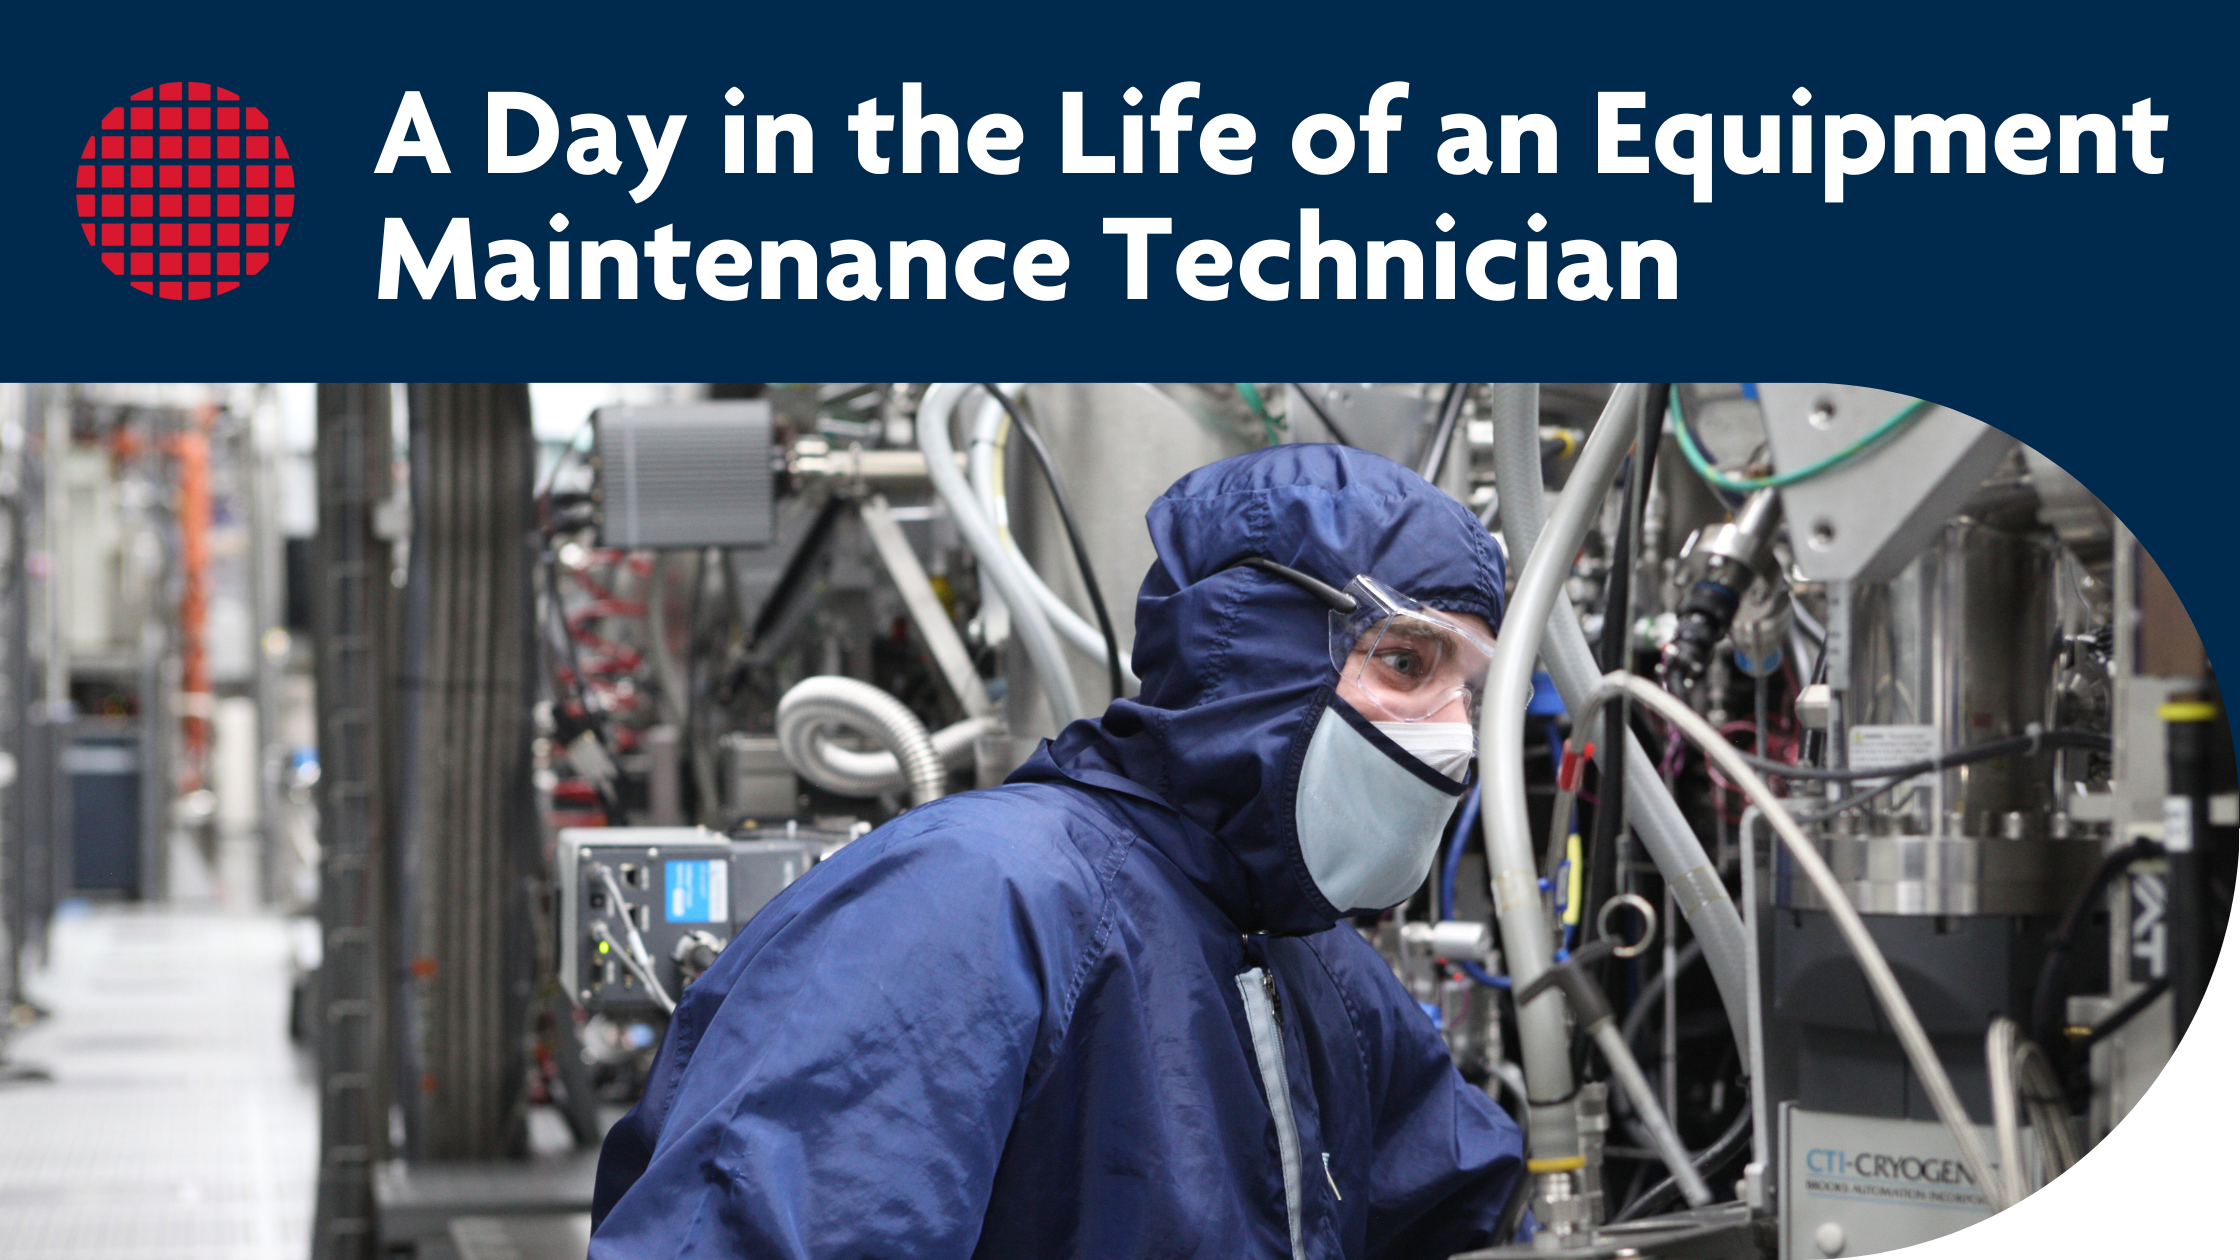 A Day in the Life of an Equipment Maintenance Technician - Featured Image